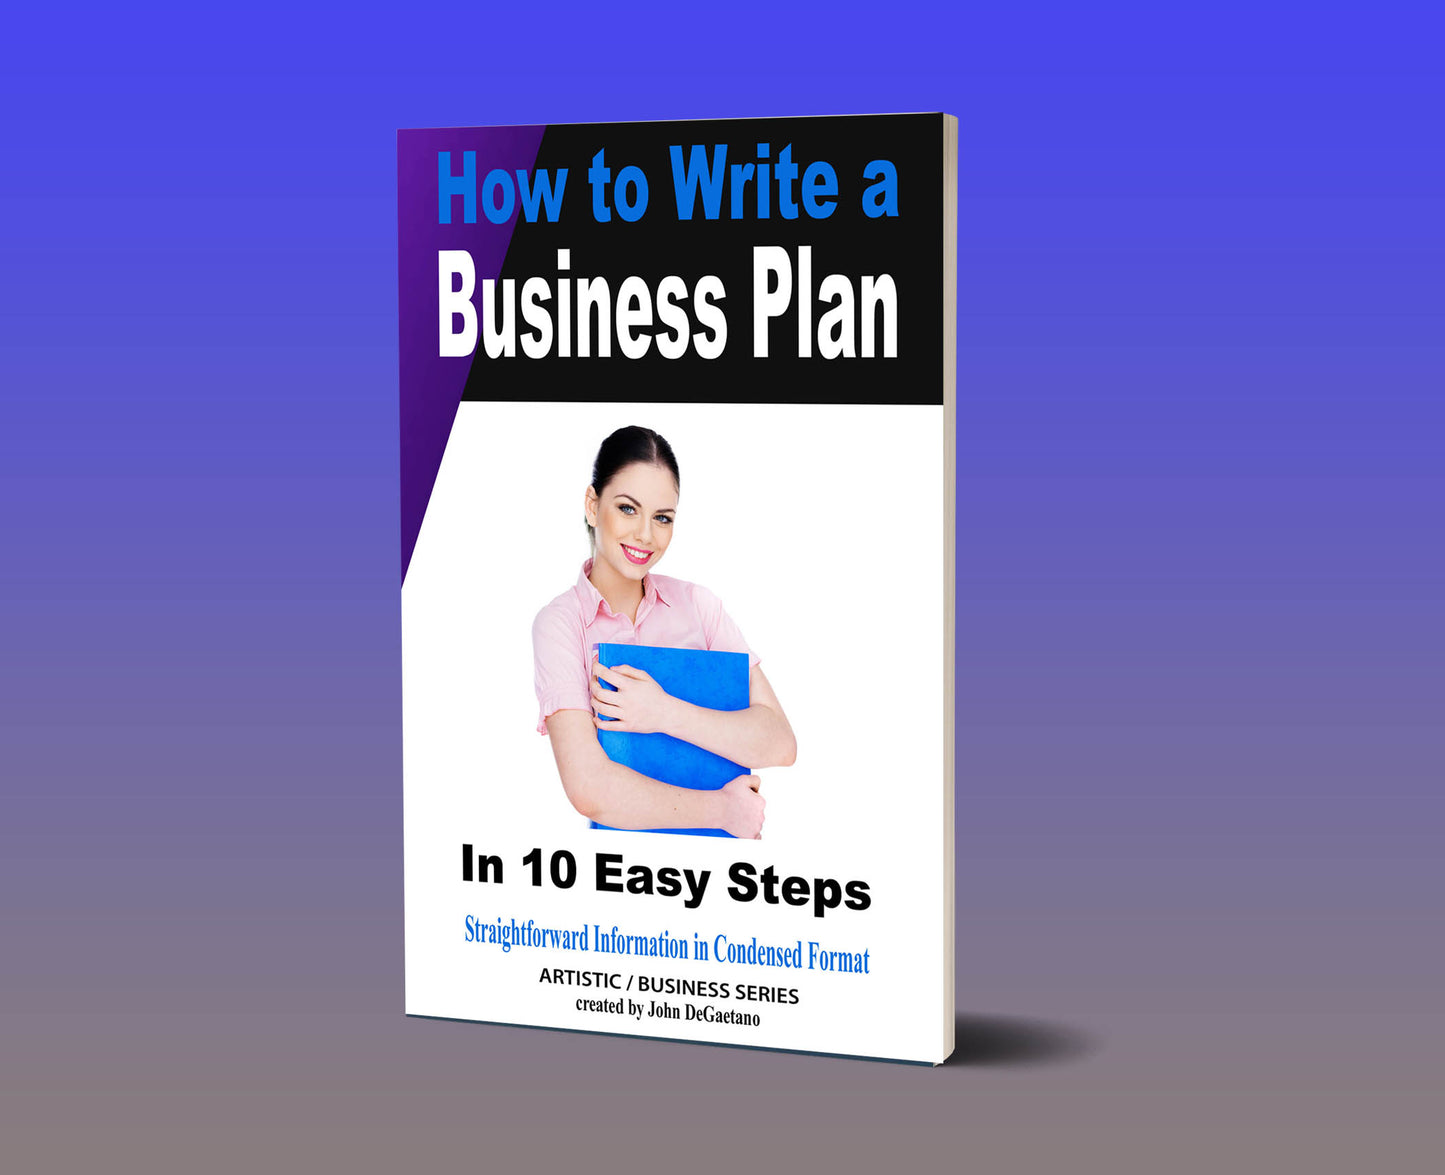 How to write a Business Plan Book cover